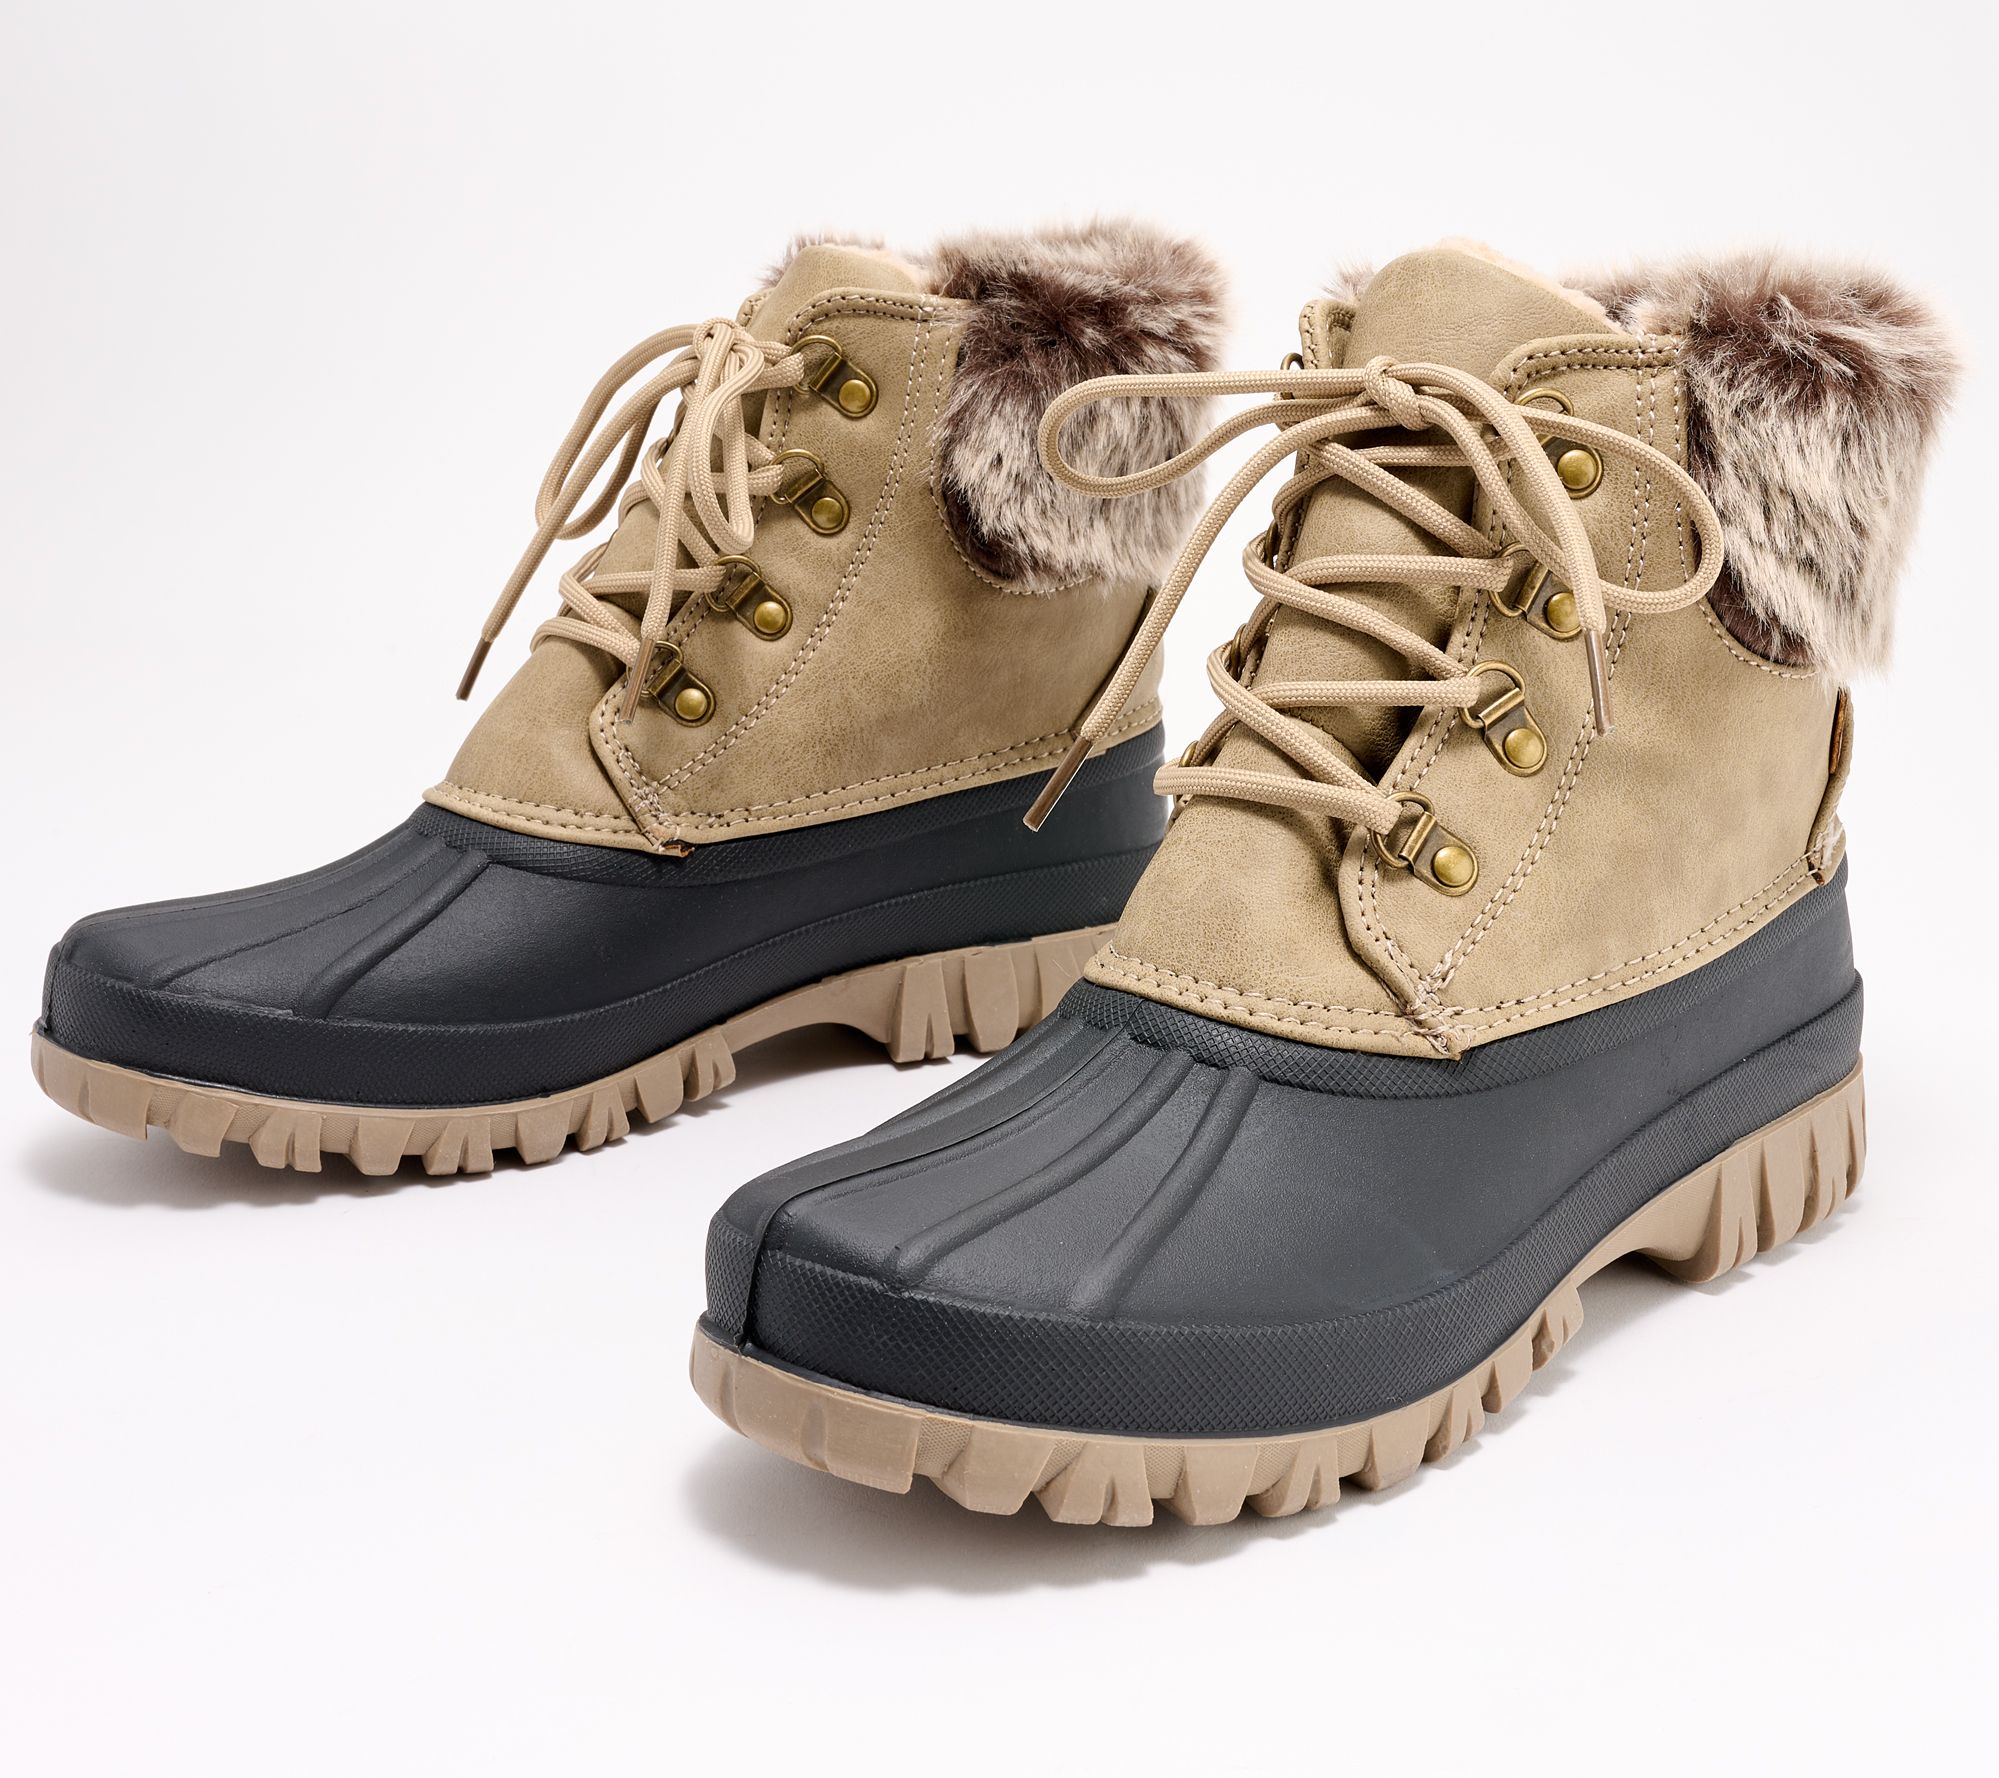 Lamo Brielle Lace-Up Lined Winter Boots -